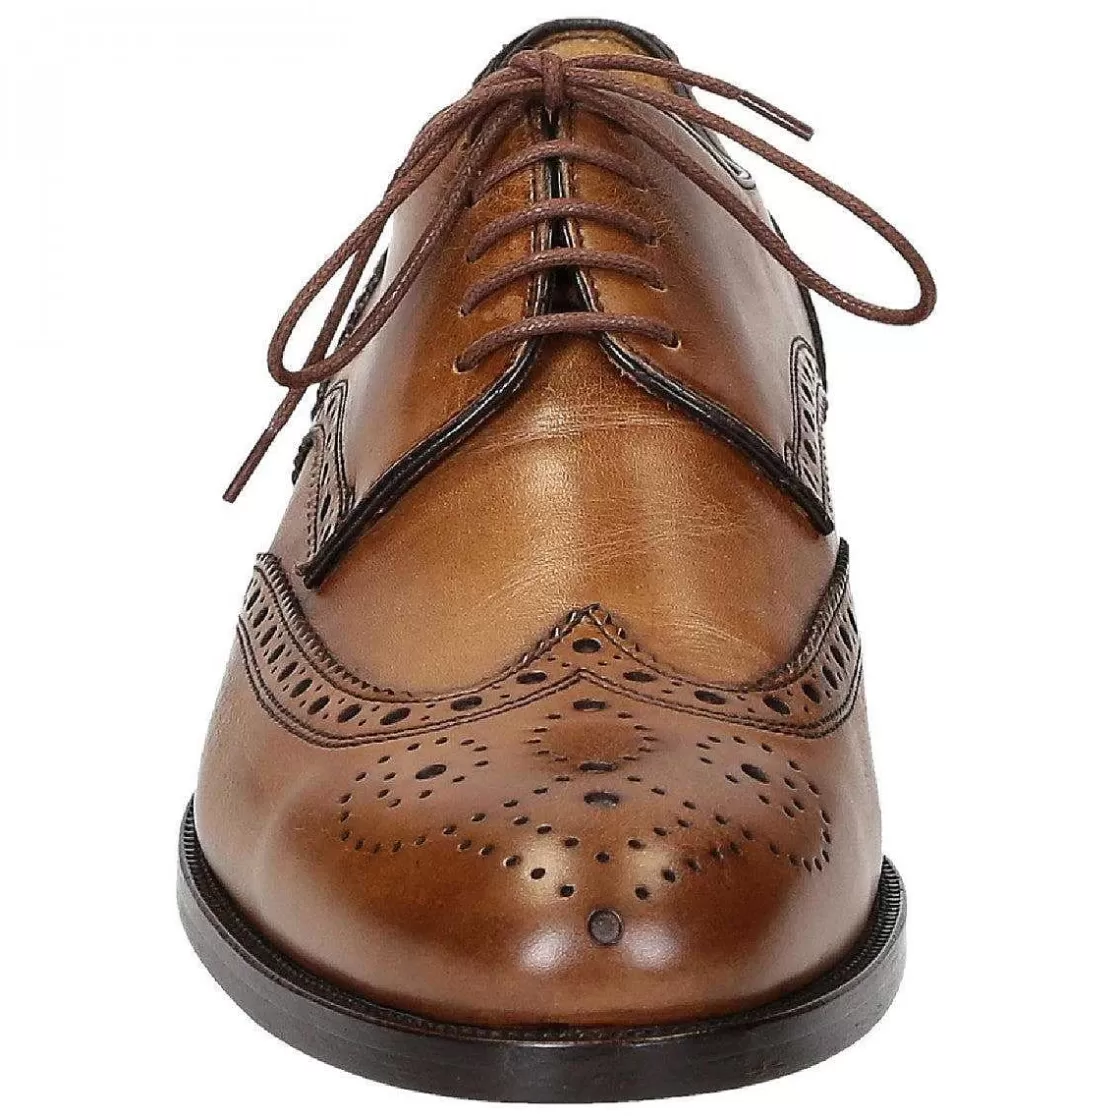 Leonardo Leather-Colored Men'S Lace-Up Shoes With Perforated Dovetail Toe Outlet